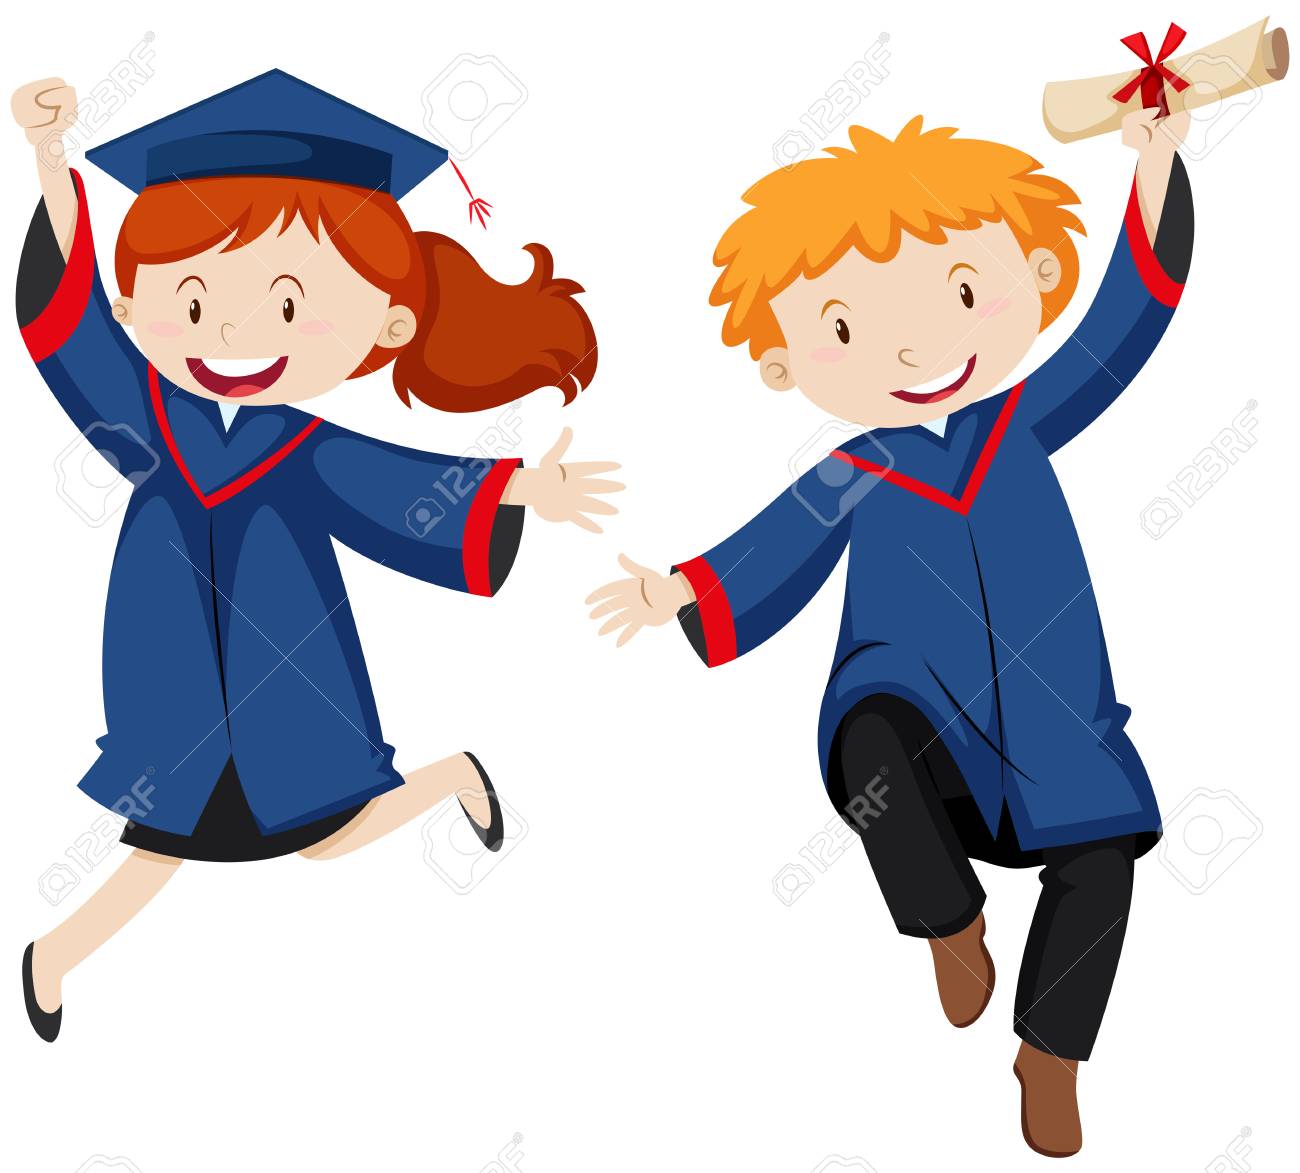 Boy and girl in graduation gown illustration.